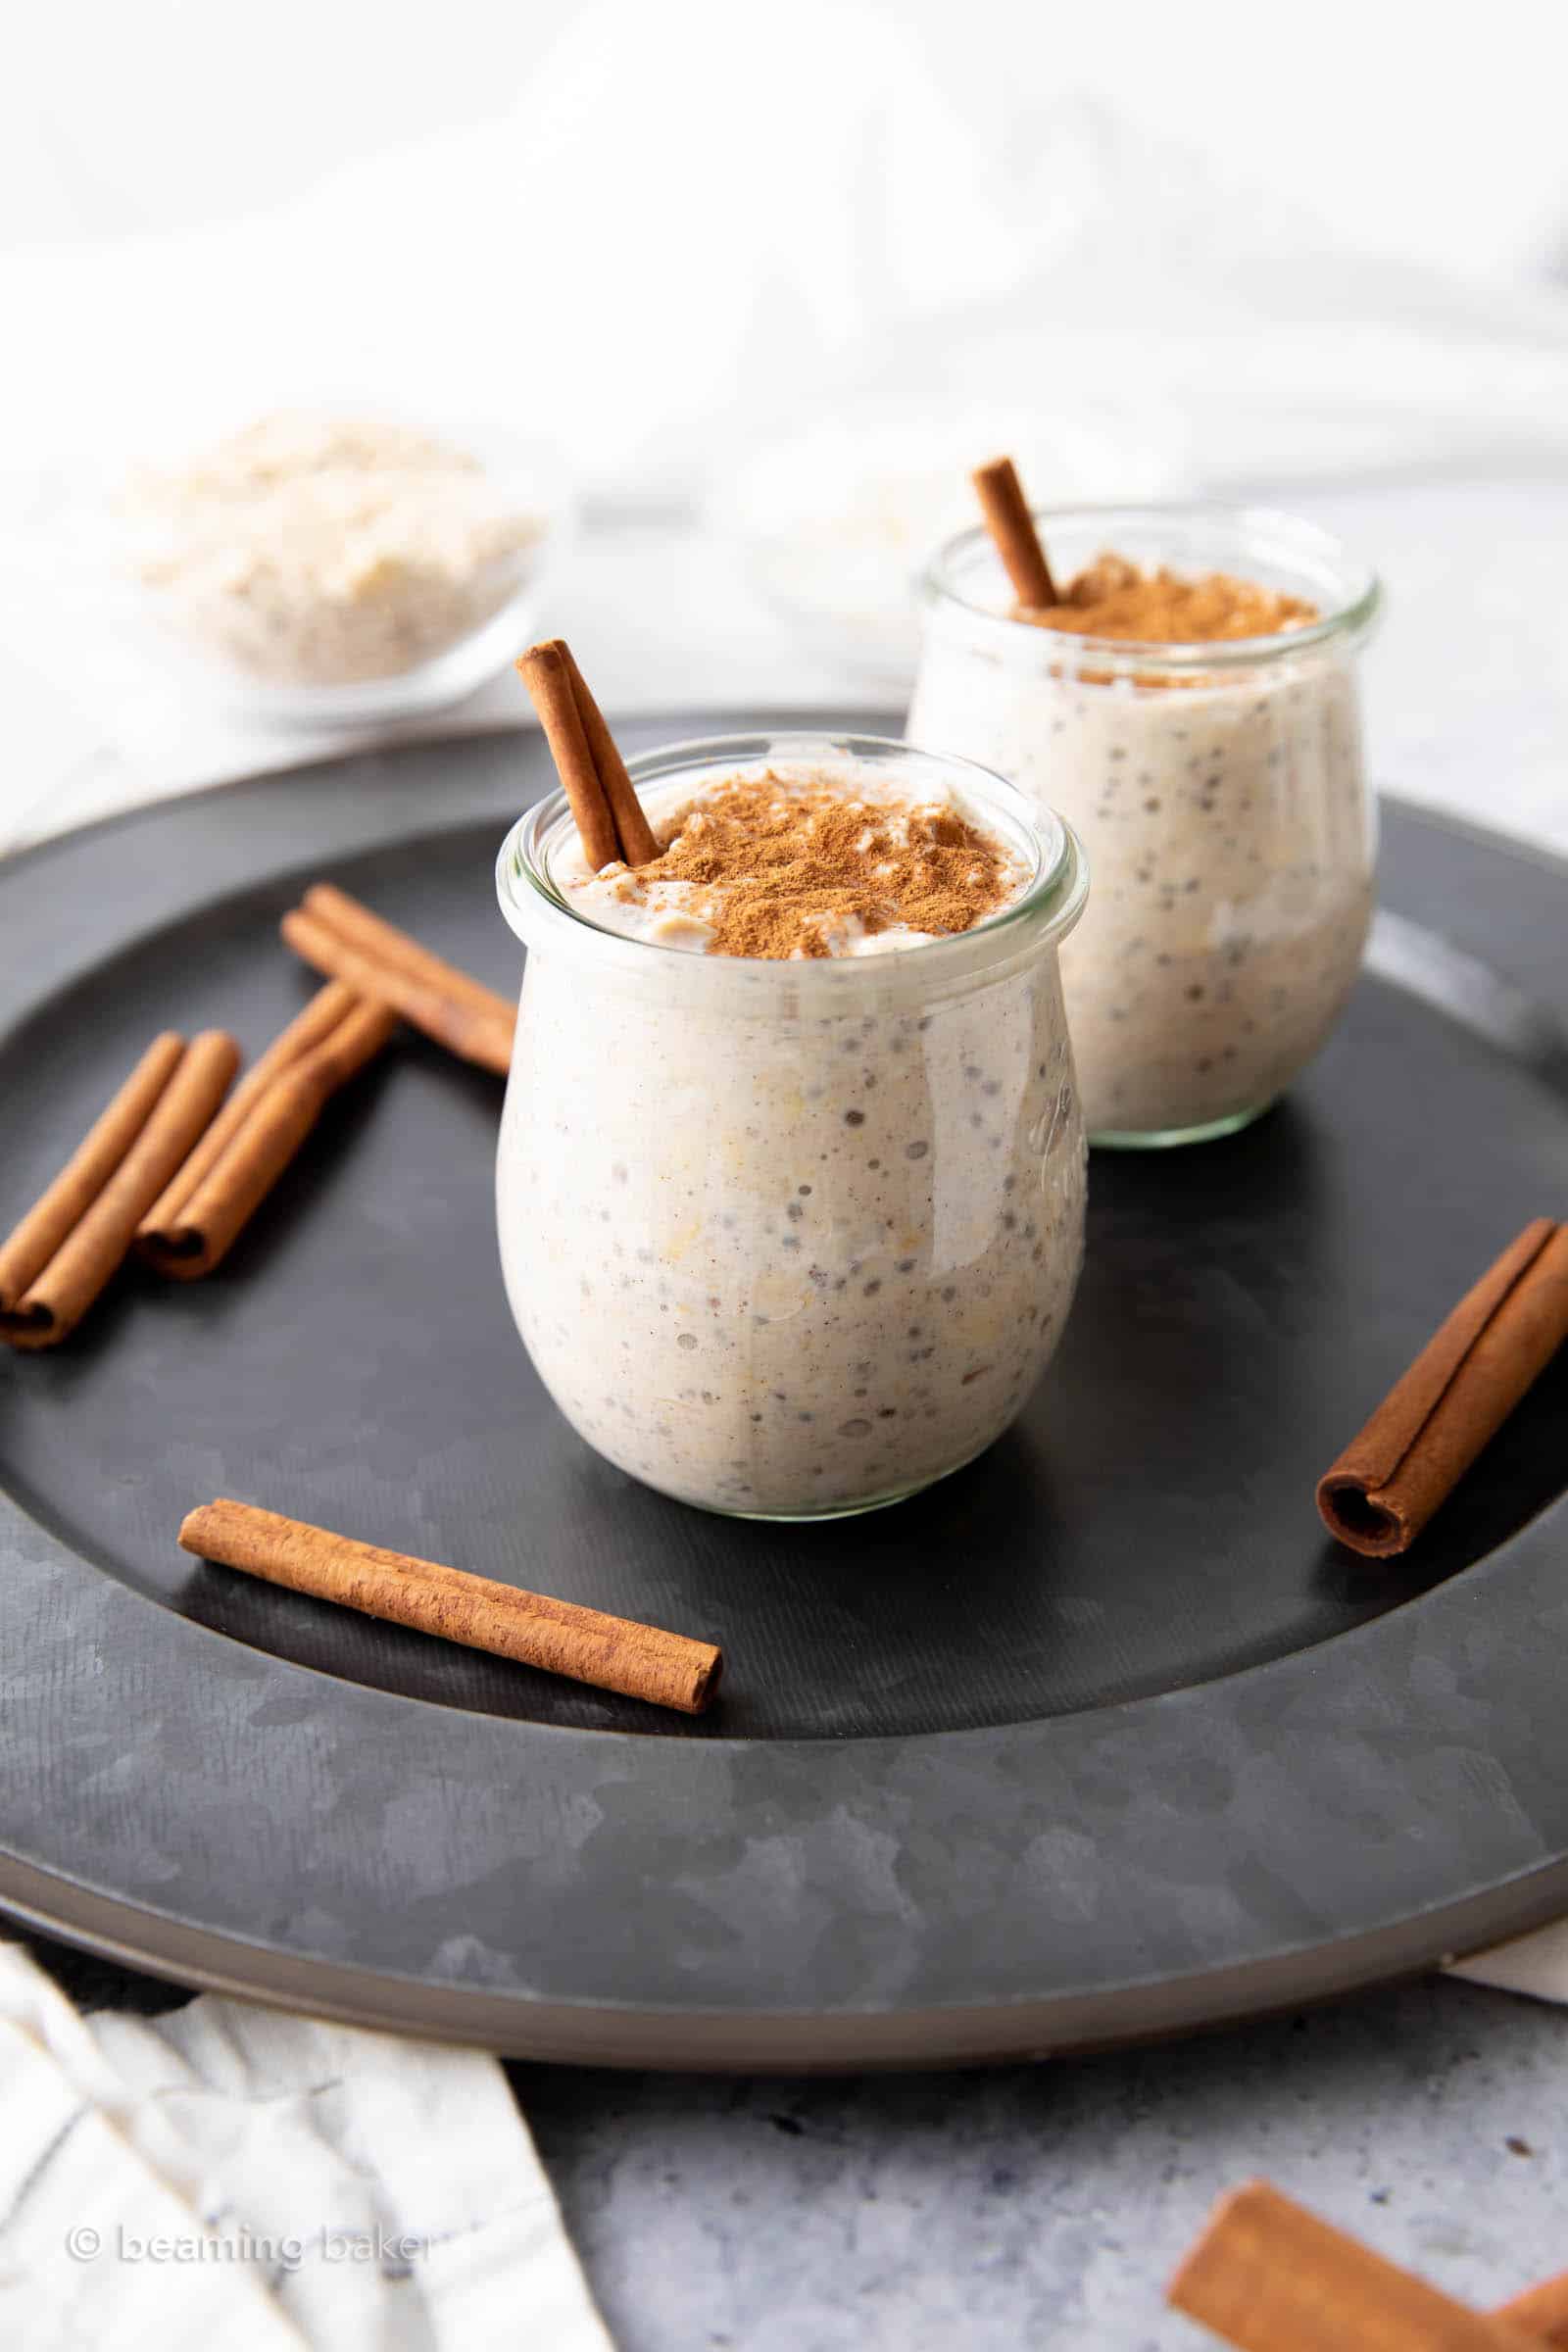 Cinnamon sticks and jars of overnight oats sitting on a gray serving tray with a white cloth